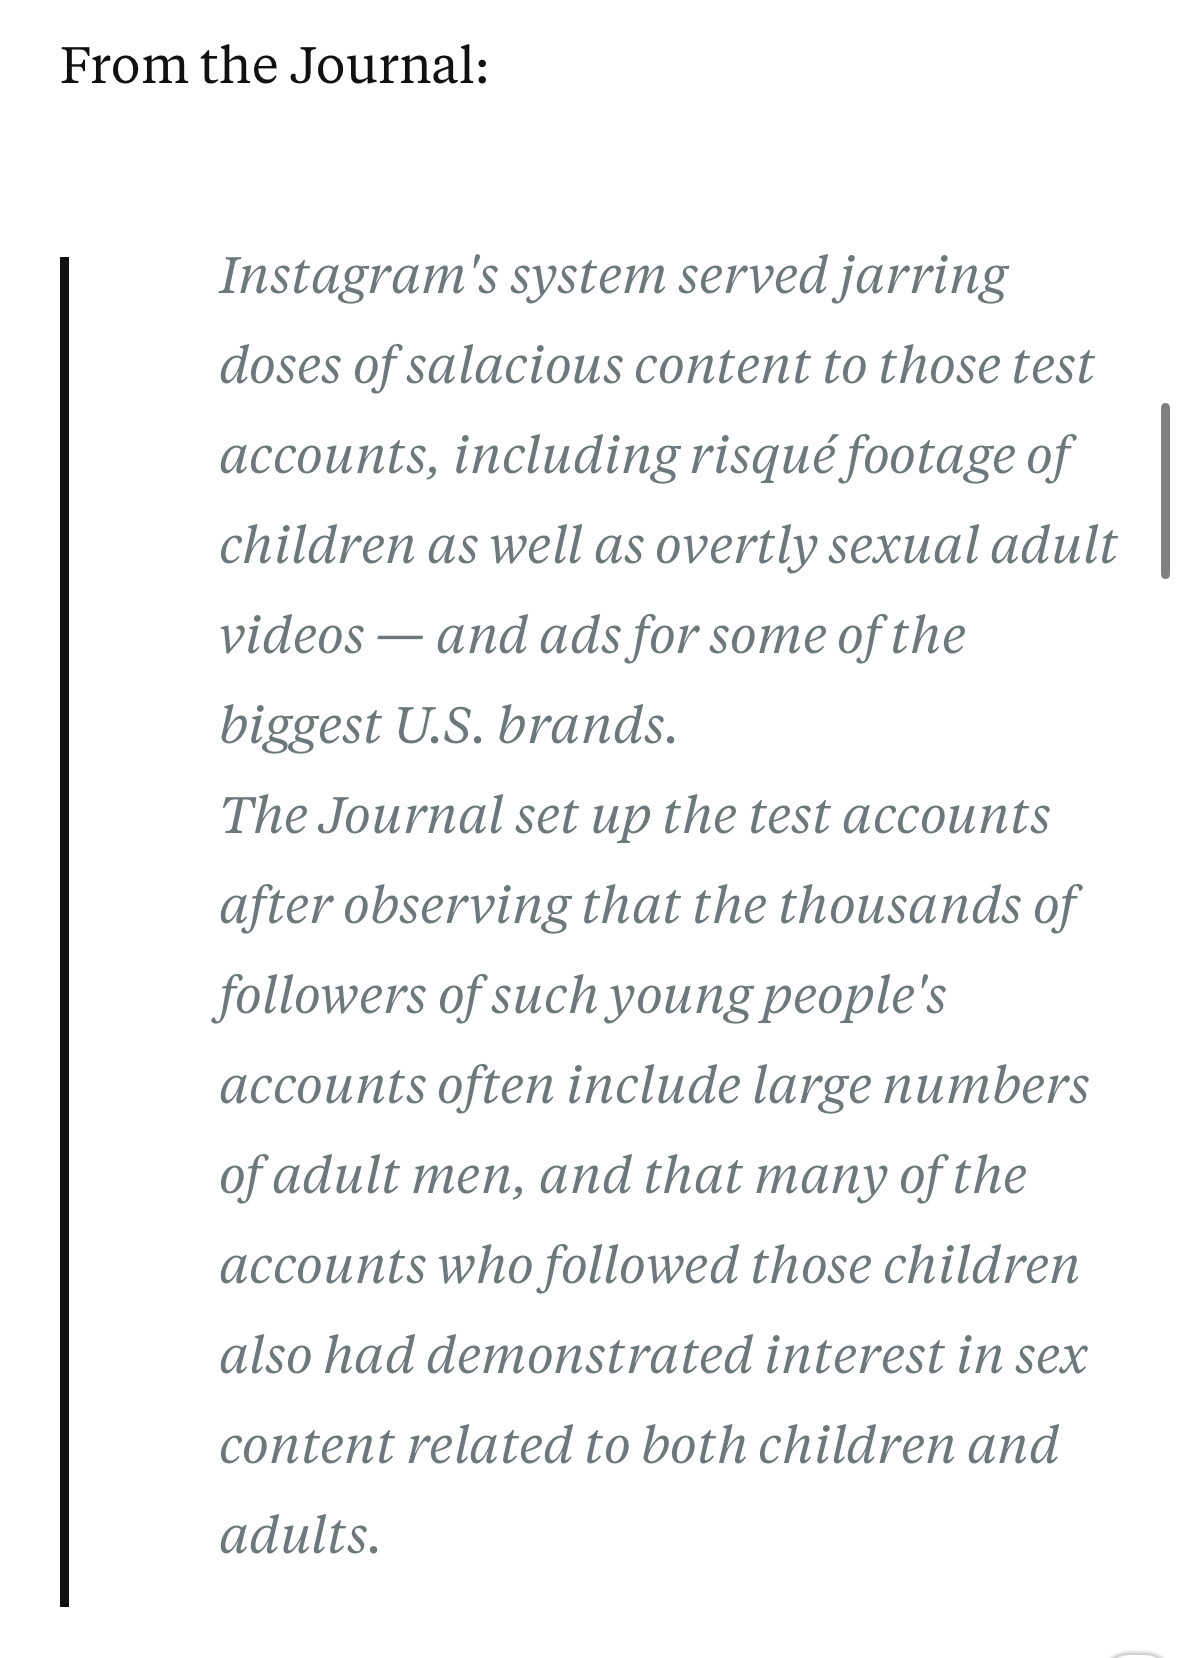 Instagram's system served jarring doses of salacious content to those test accounts, including risqué footage of children as well as overtly sexual adult videos — and ads for some of the biggest U.S. brands.&10;The Journal set up the test accounts after observing that the thousands of followers of such young people's accounts often include large numbers of adult men, and that many of the accounts who followed those children also had demonstrated interest in sex&10;content related to both children and adults.